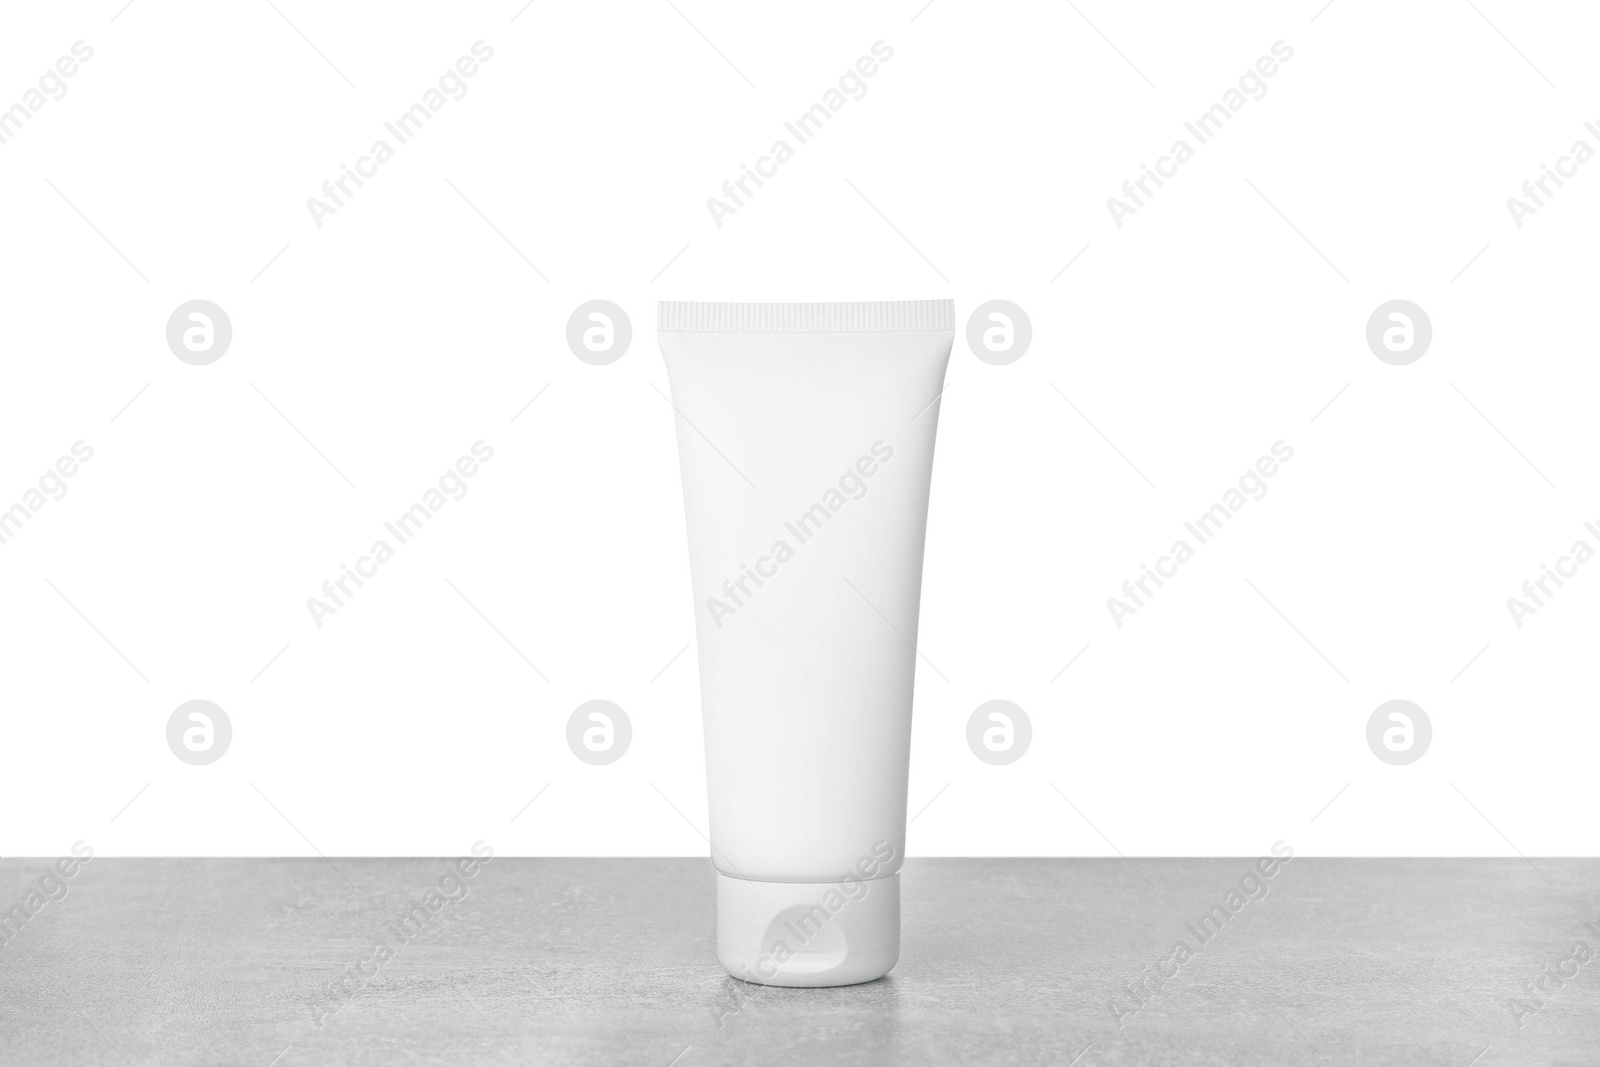 Photo of Tube of hand cream on gray table against white background